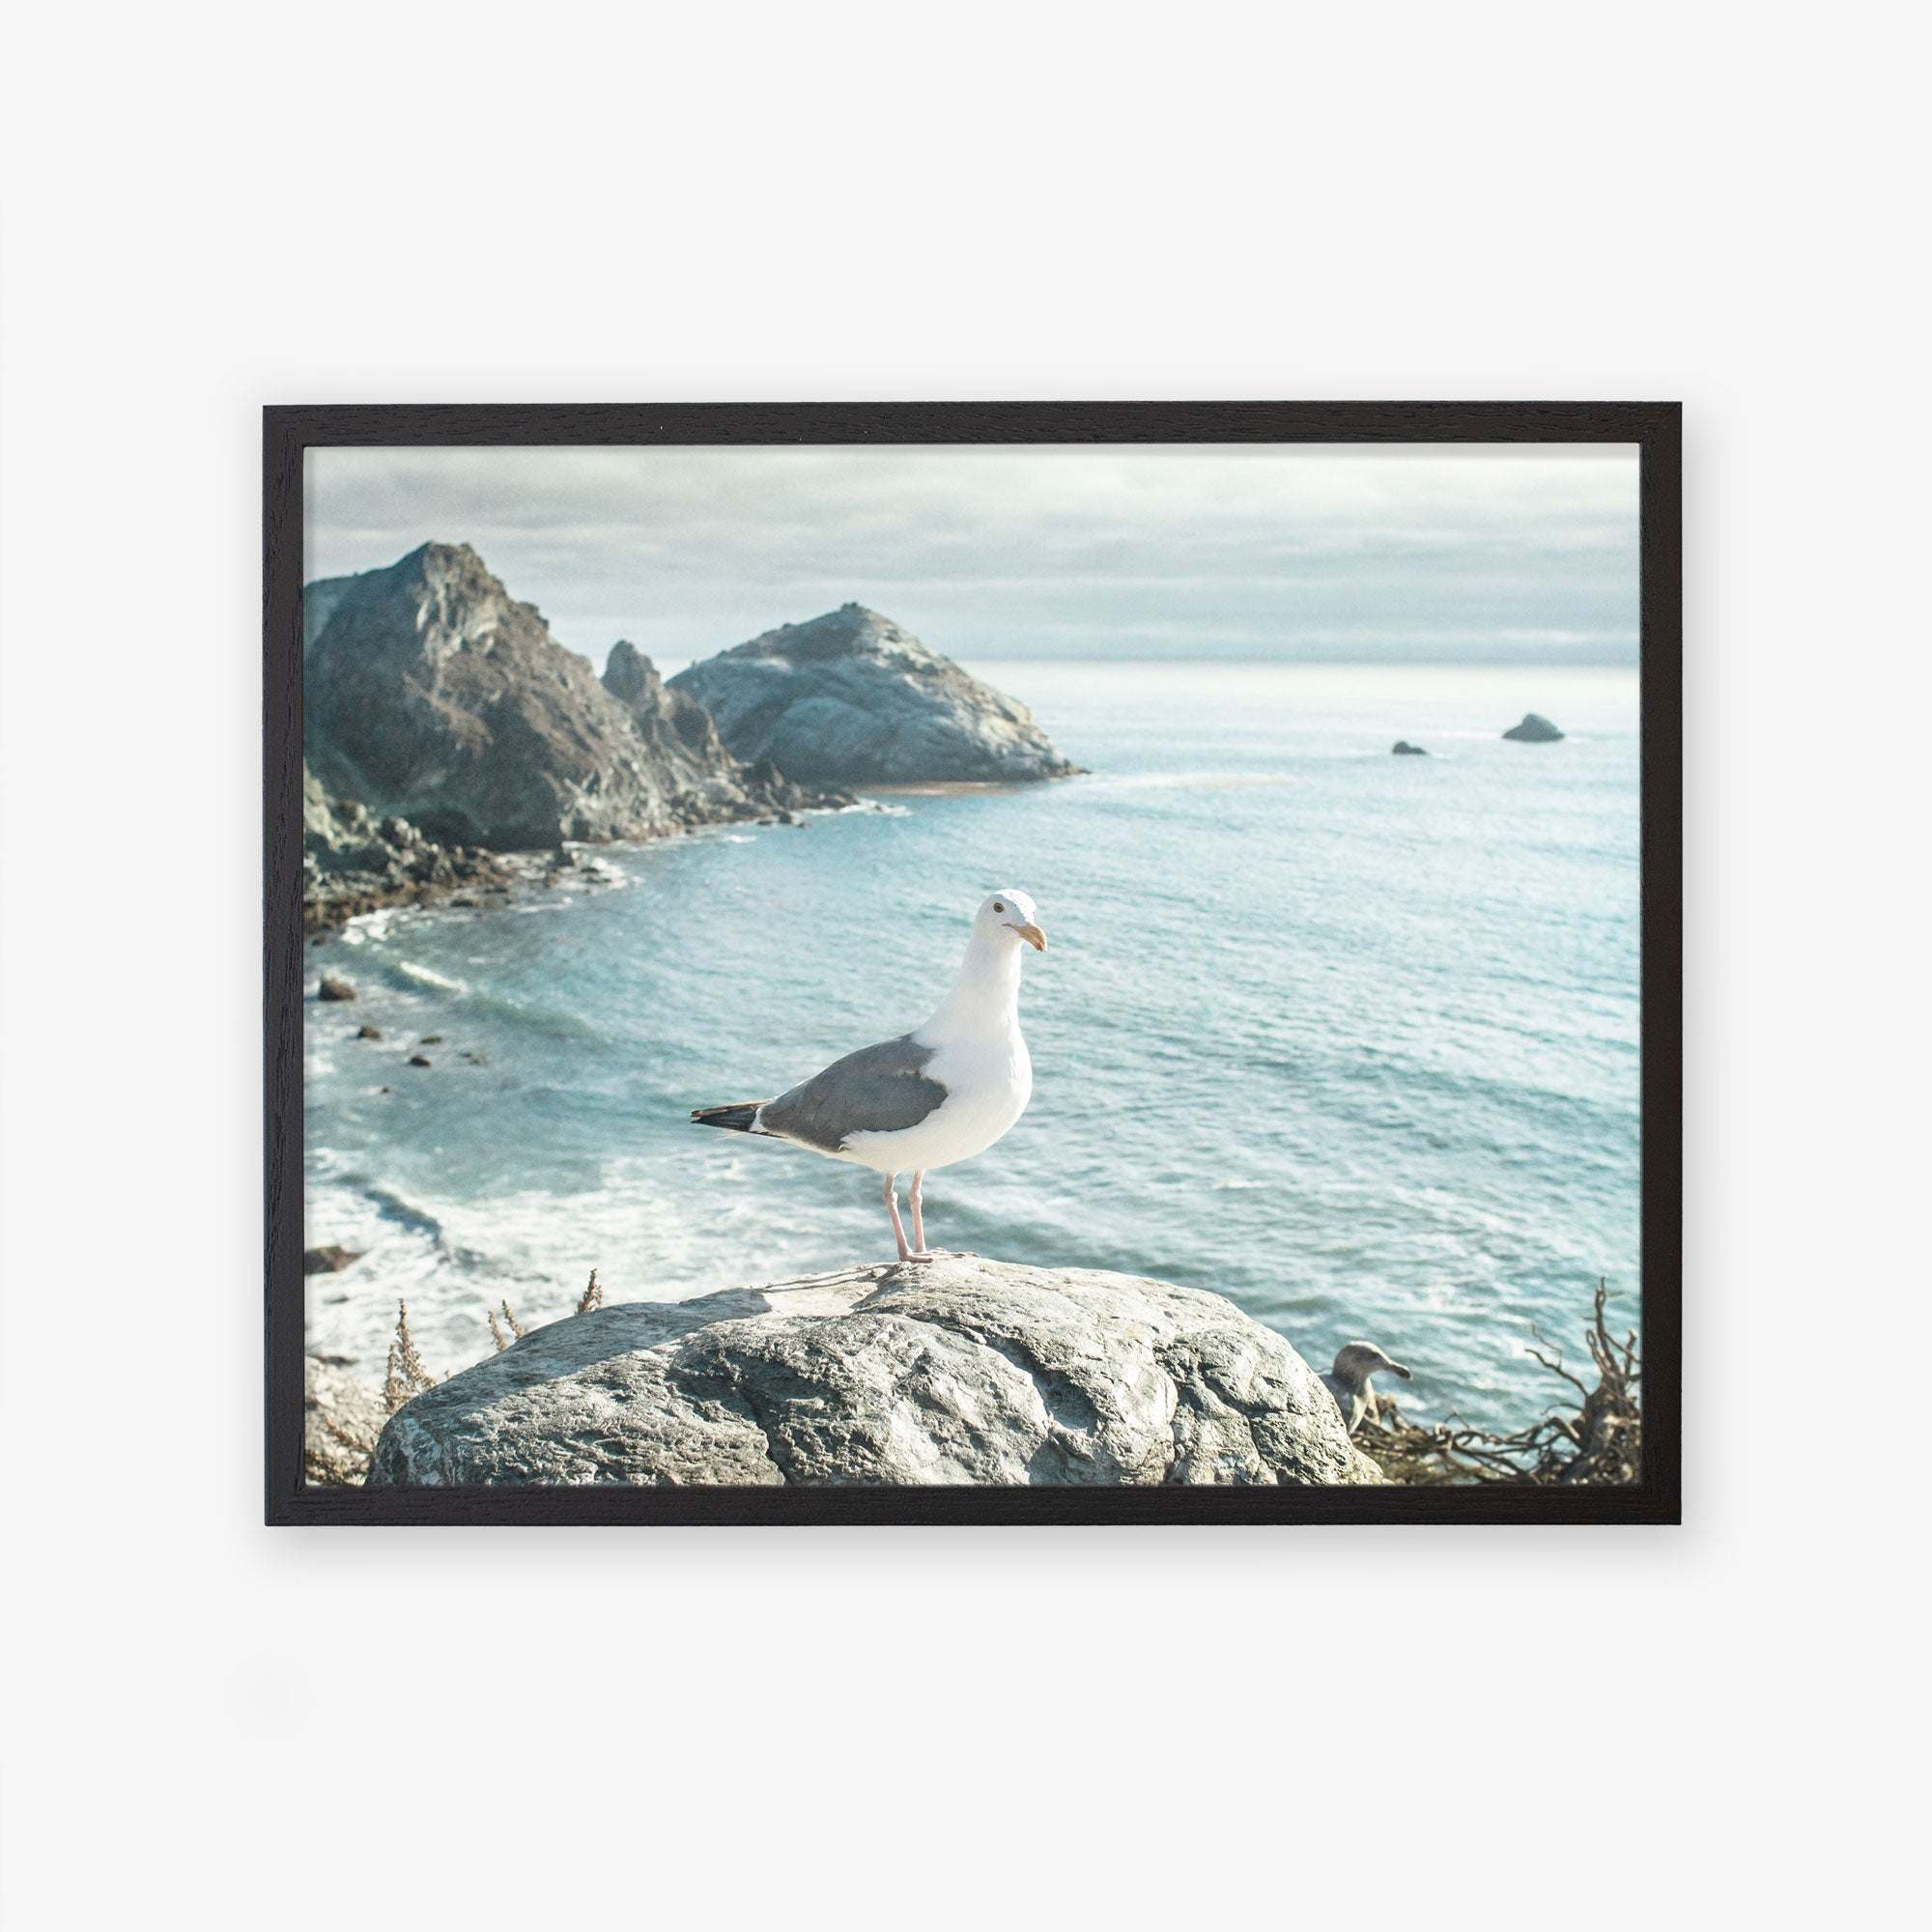 A framed photograph of a seagull standing on a rock with a scenic view of Big Sur&#39;s rocky coastlines and calm blue ocean waters under a clear sky, featuring the Offley Green Big Sur Landscape Print, &#39;Lobster Mornay For Tea&#39;.